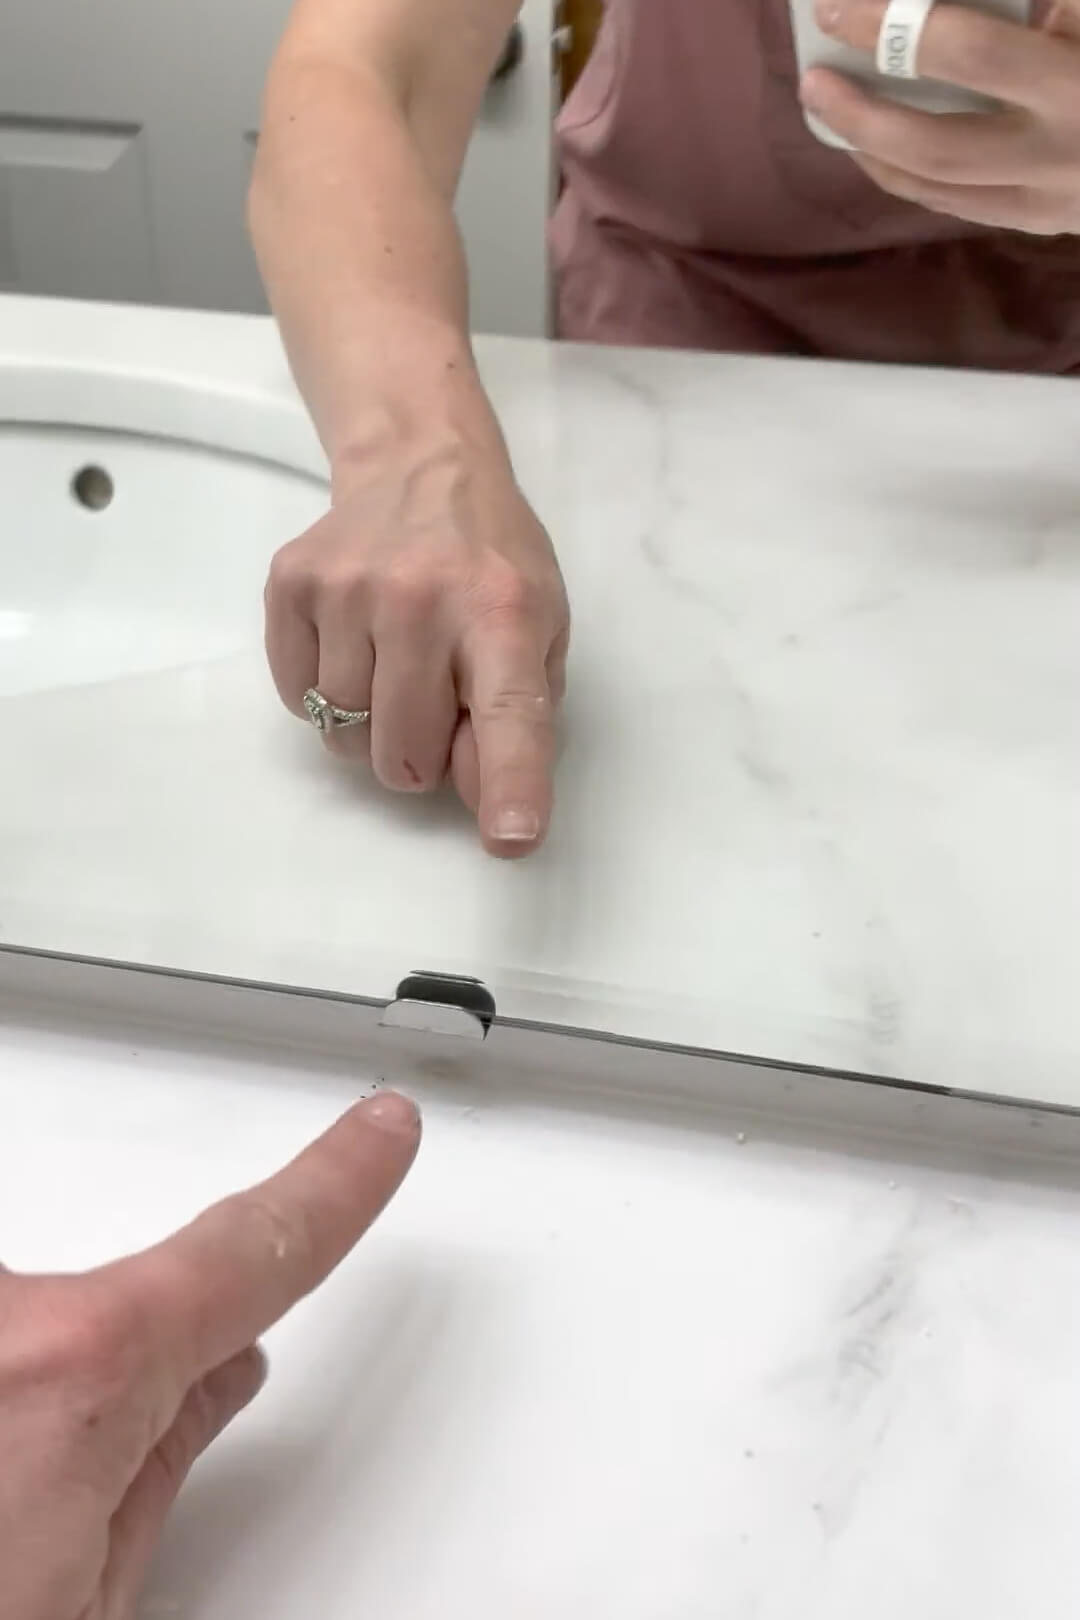 Clips are being used to hold the bathroom mirror to the wall.